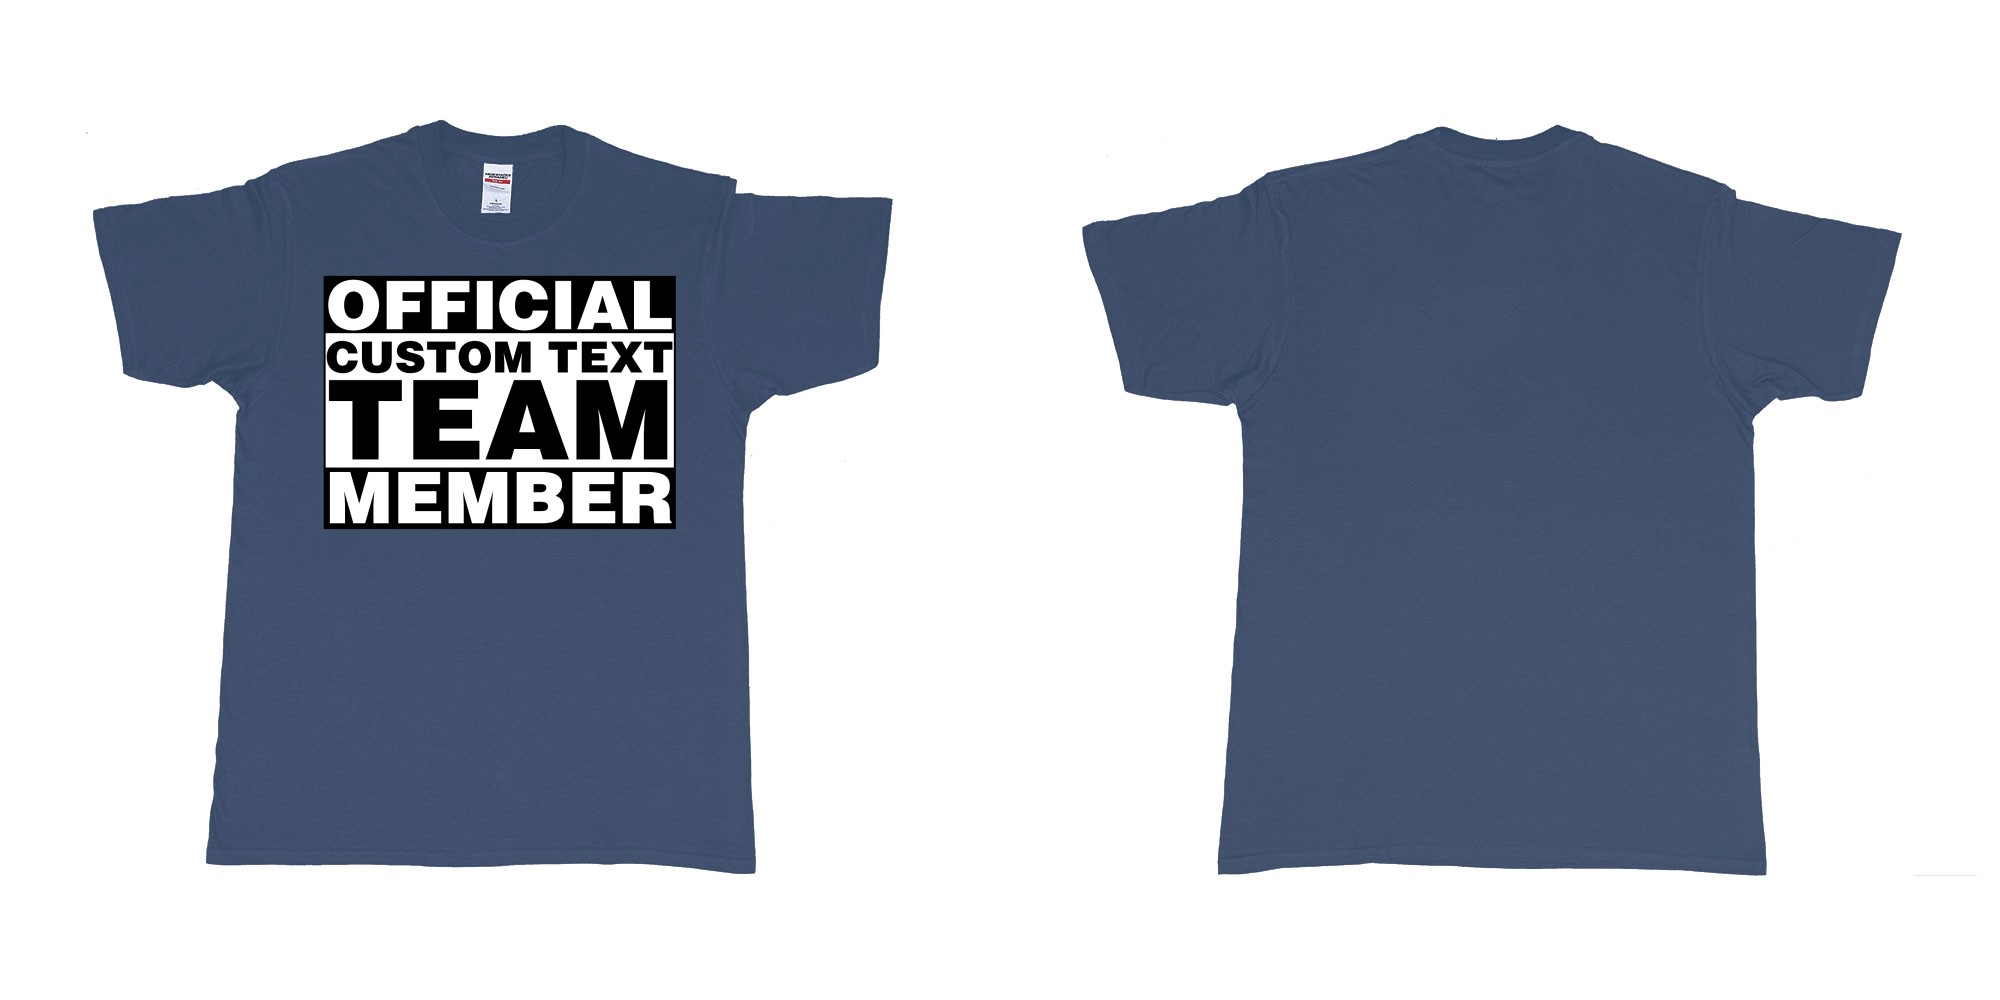 Custom tshirt design official custom text team member in fabric color navy choice your own text made in Bali by The Pirate Way